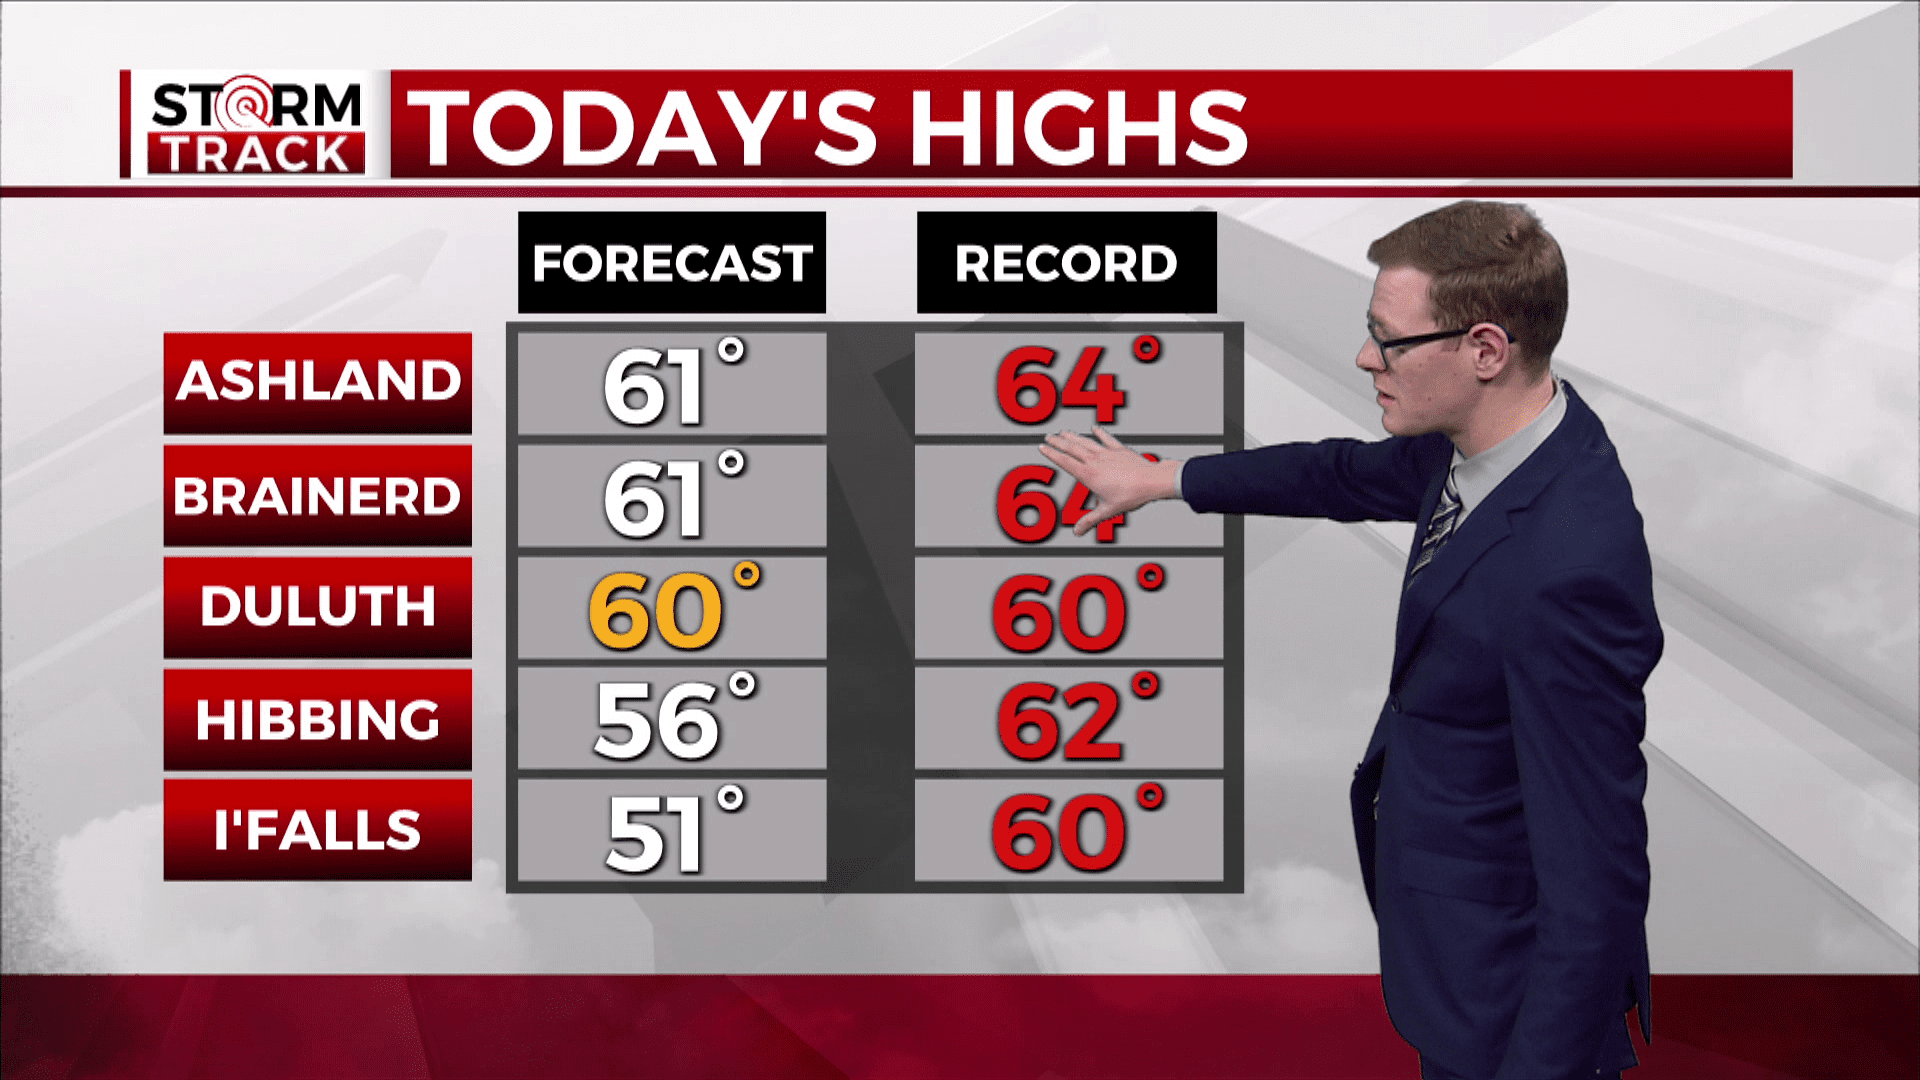 Brandon showing Tuesday's forecast highs compared to records